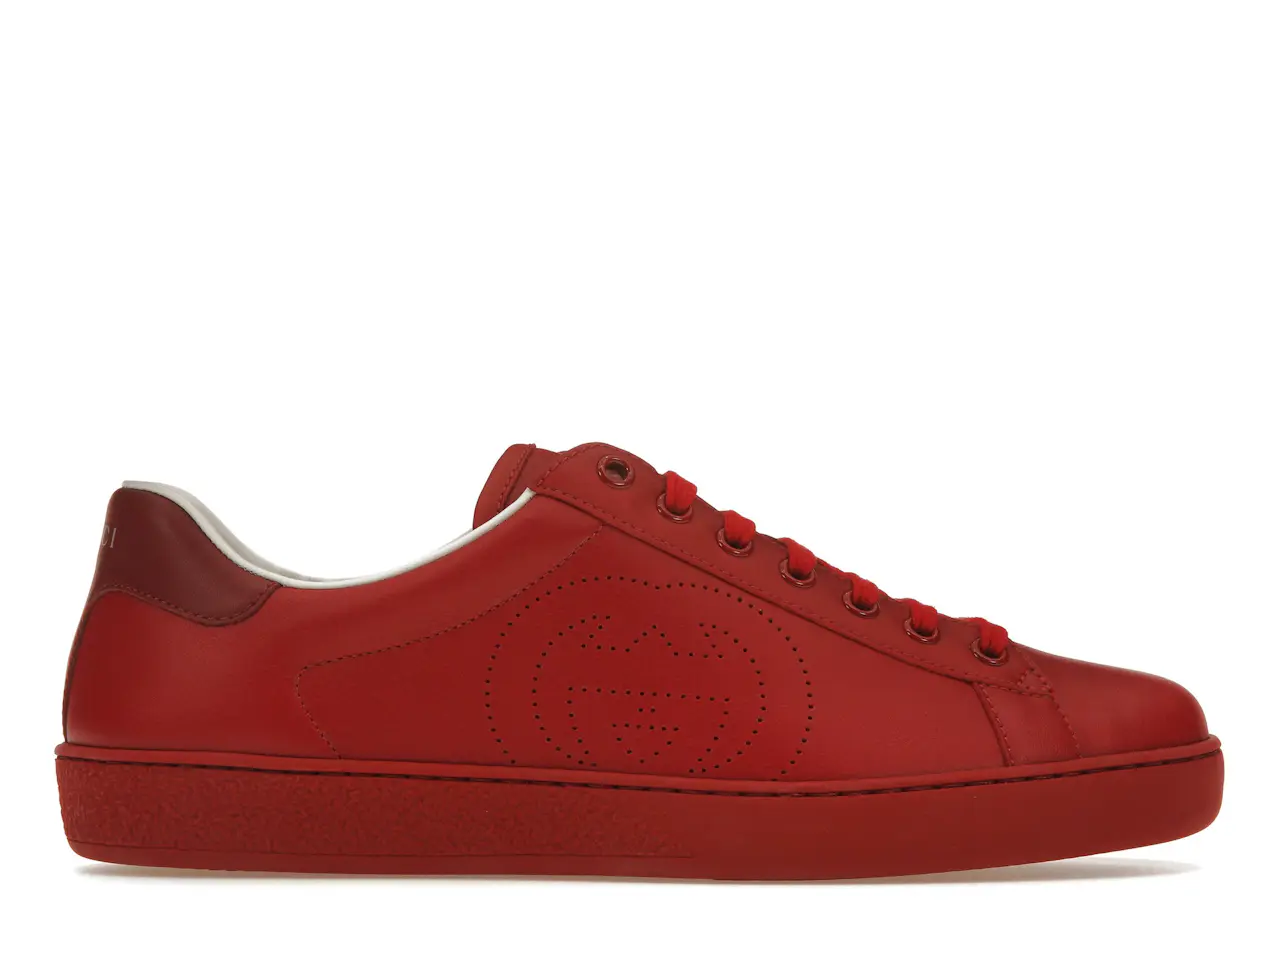 Gucci Ace Perforated Interlocking G Red Men's - _599147 AYO70 6463 - US